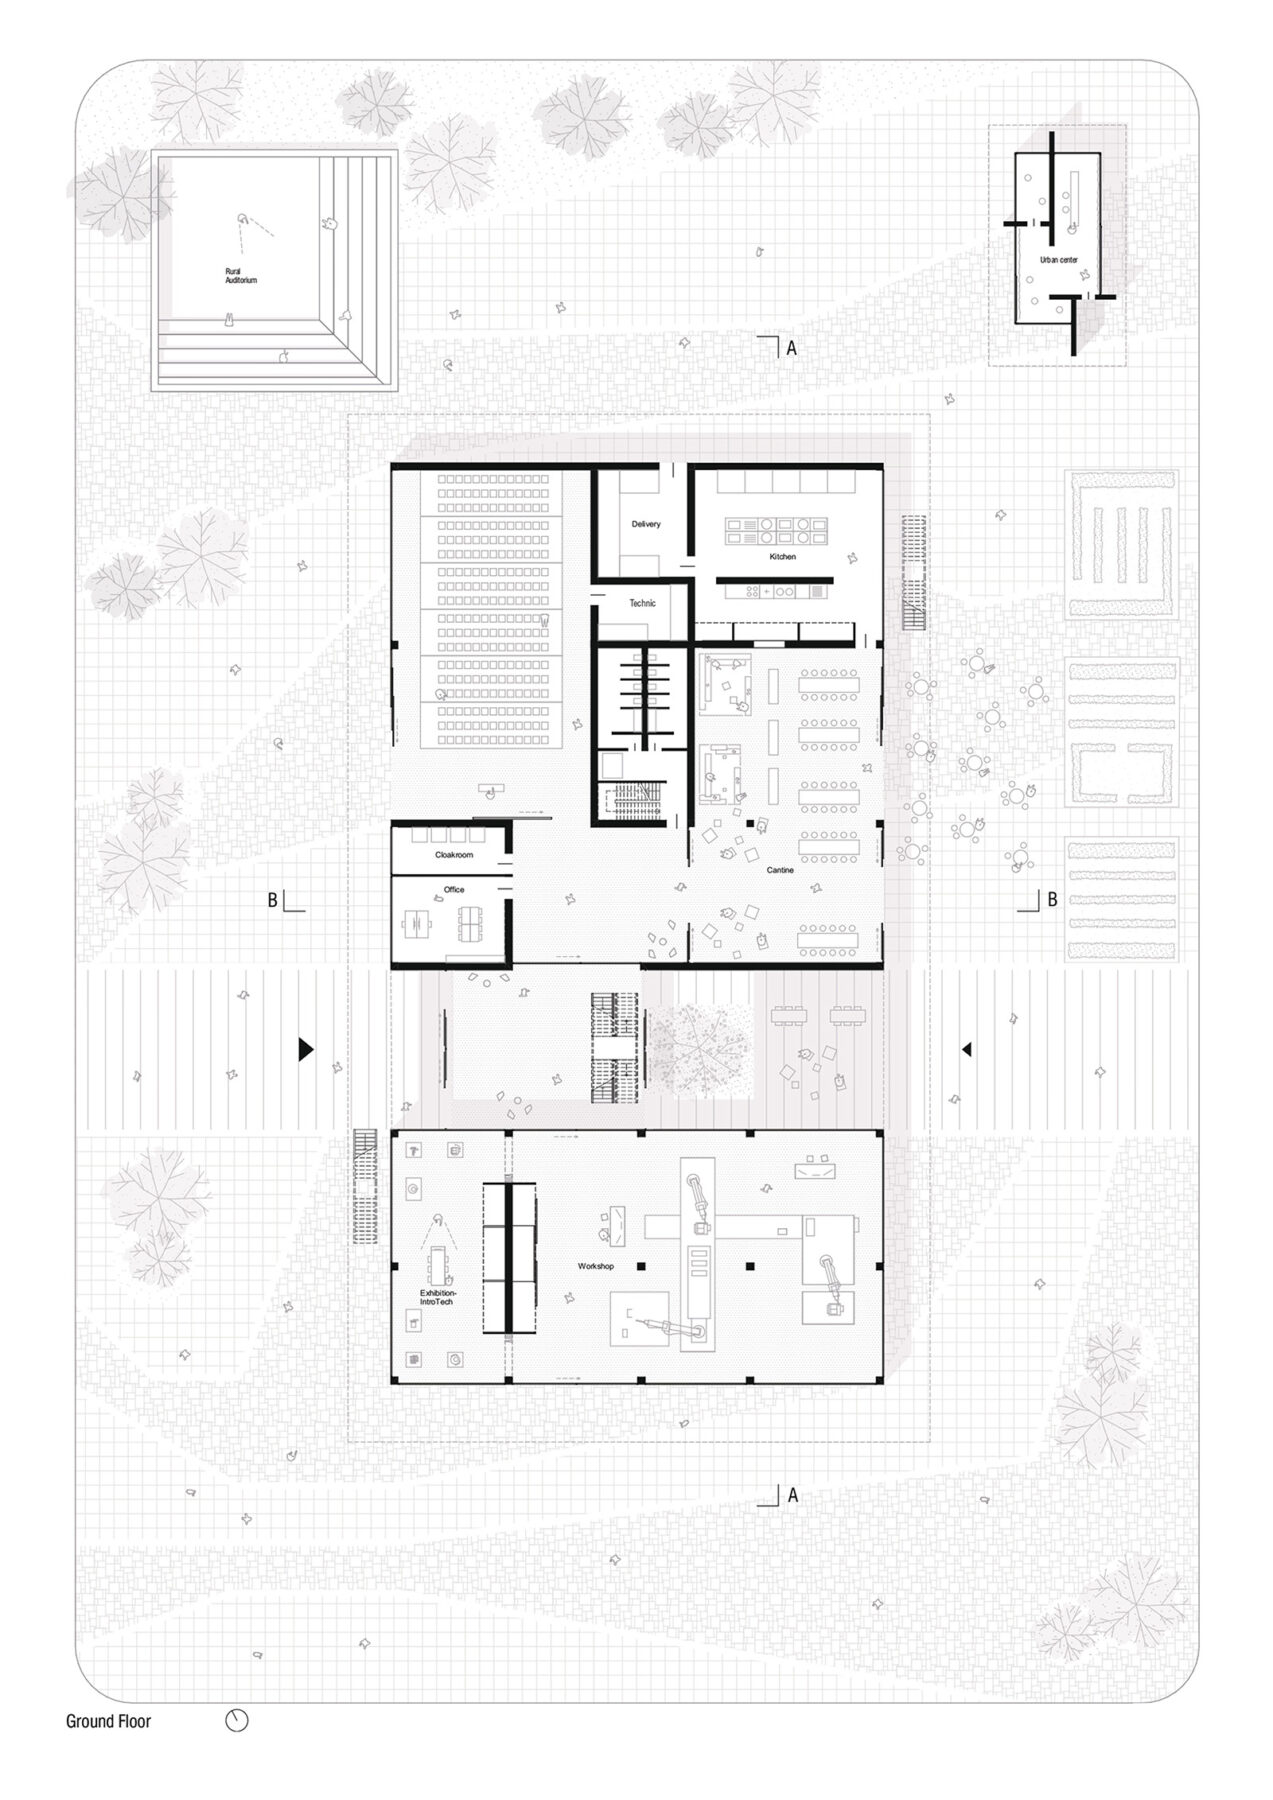 Archisearch The city as campus: Tirana030 | Diploma thesis project by Elvin Demiri